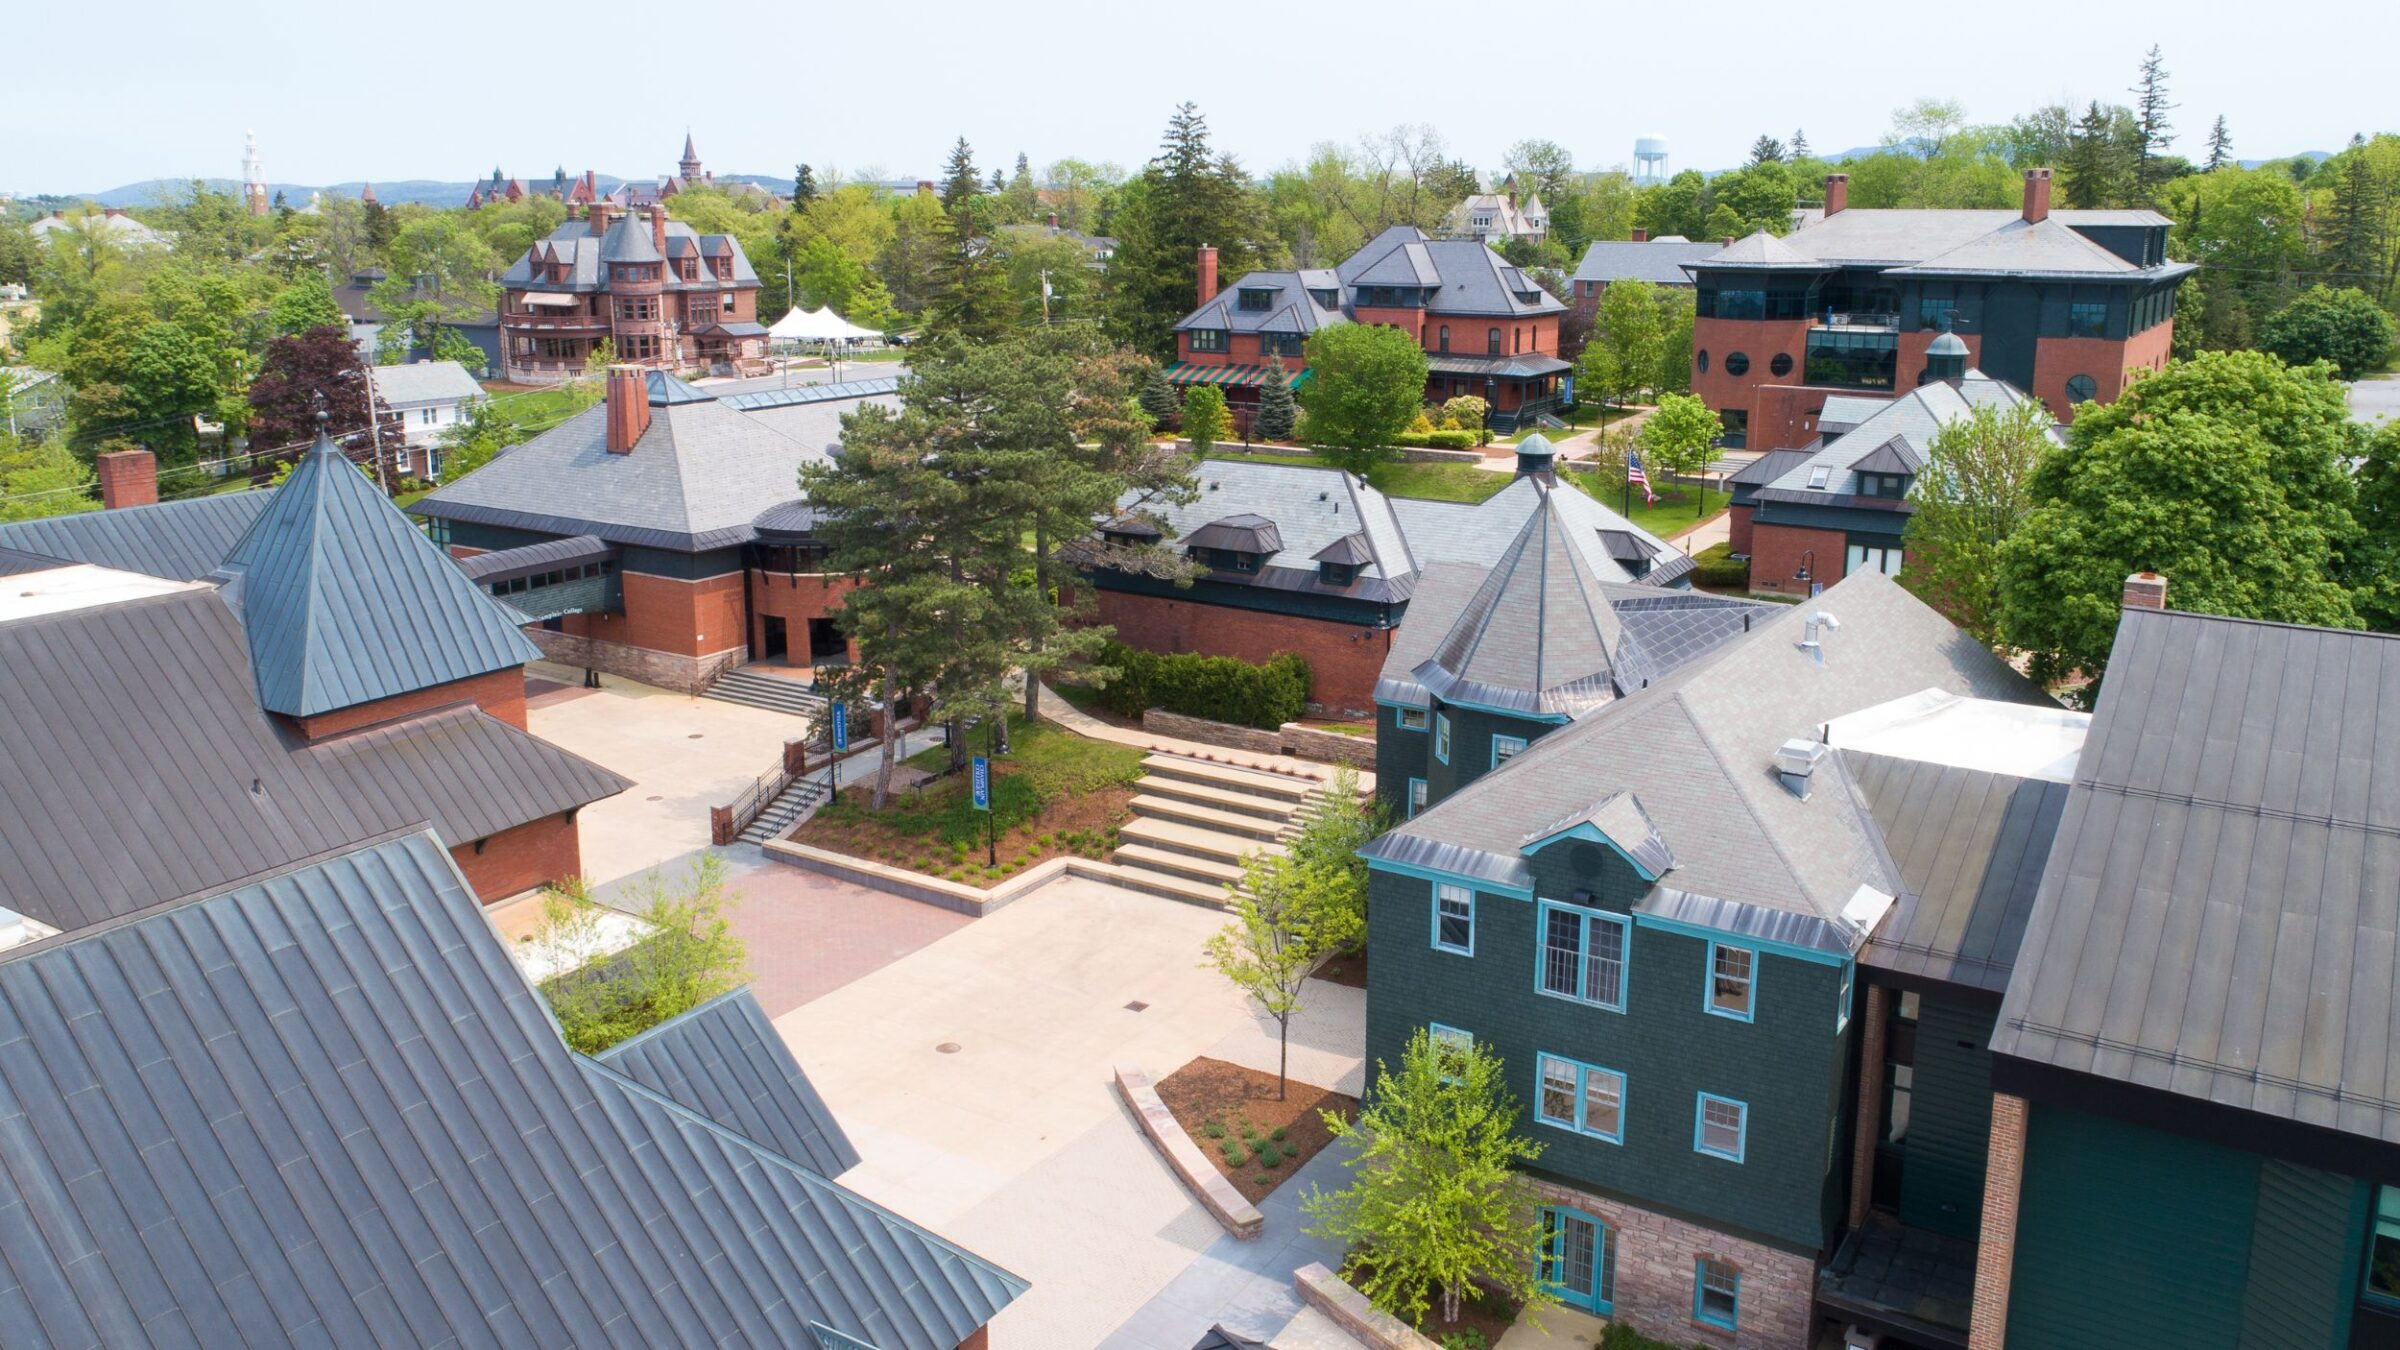 Birdseye view of campus from a drone